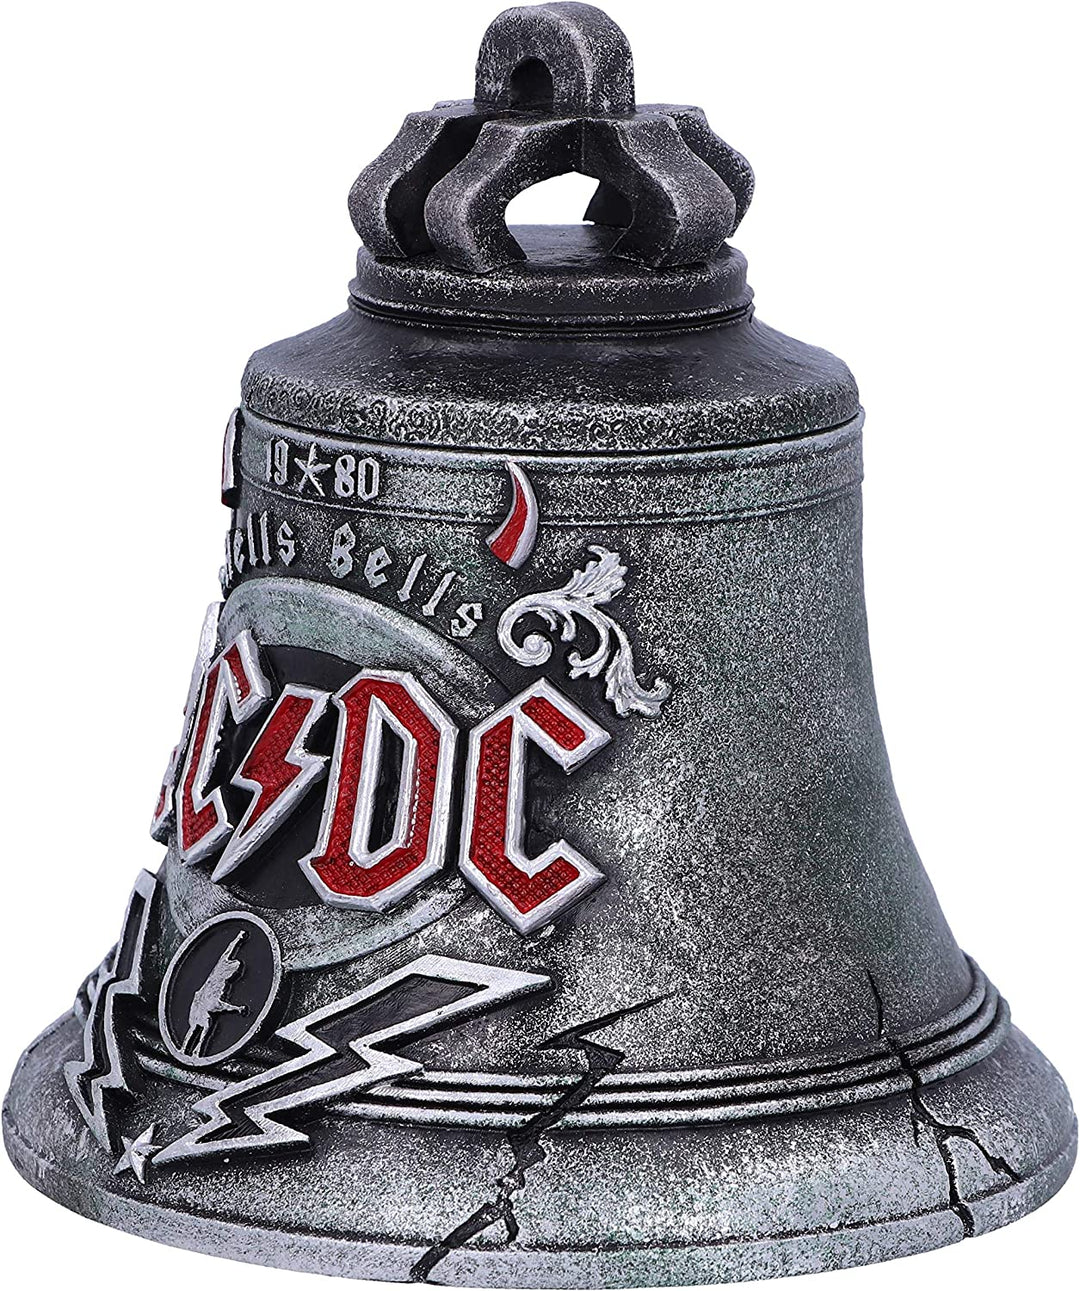 Nemesis Now Officially Licensed ACDC Hells Bells Box, Resin, Black, 13cm